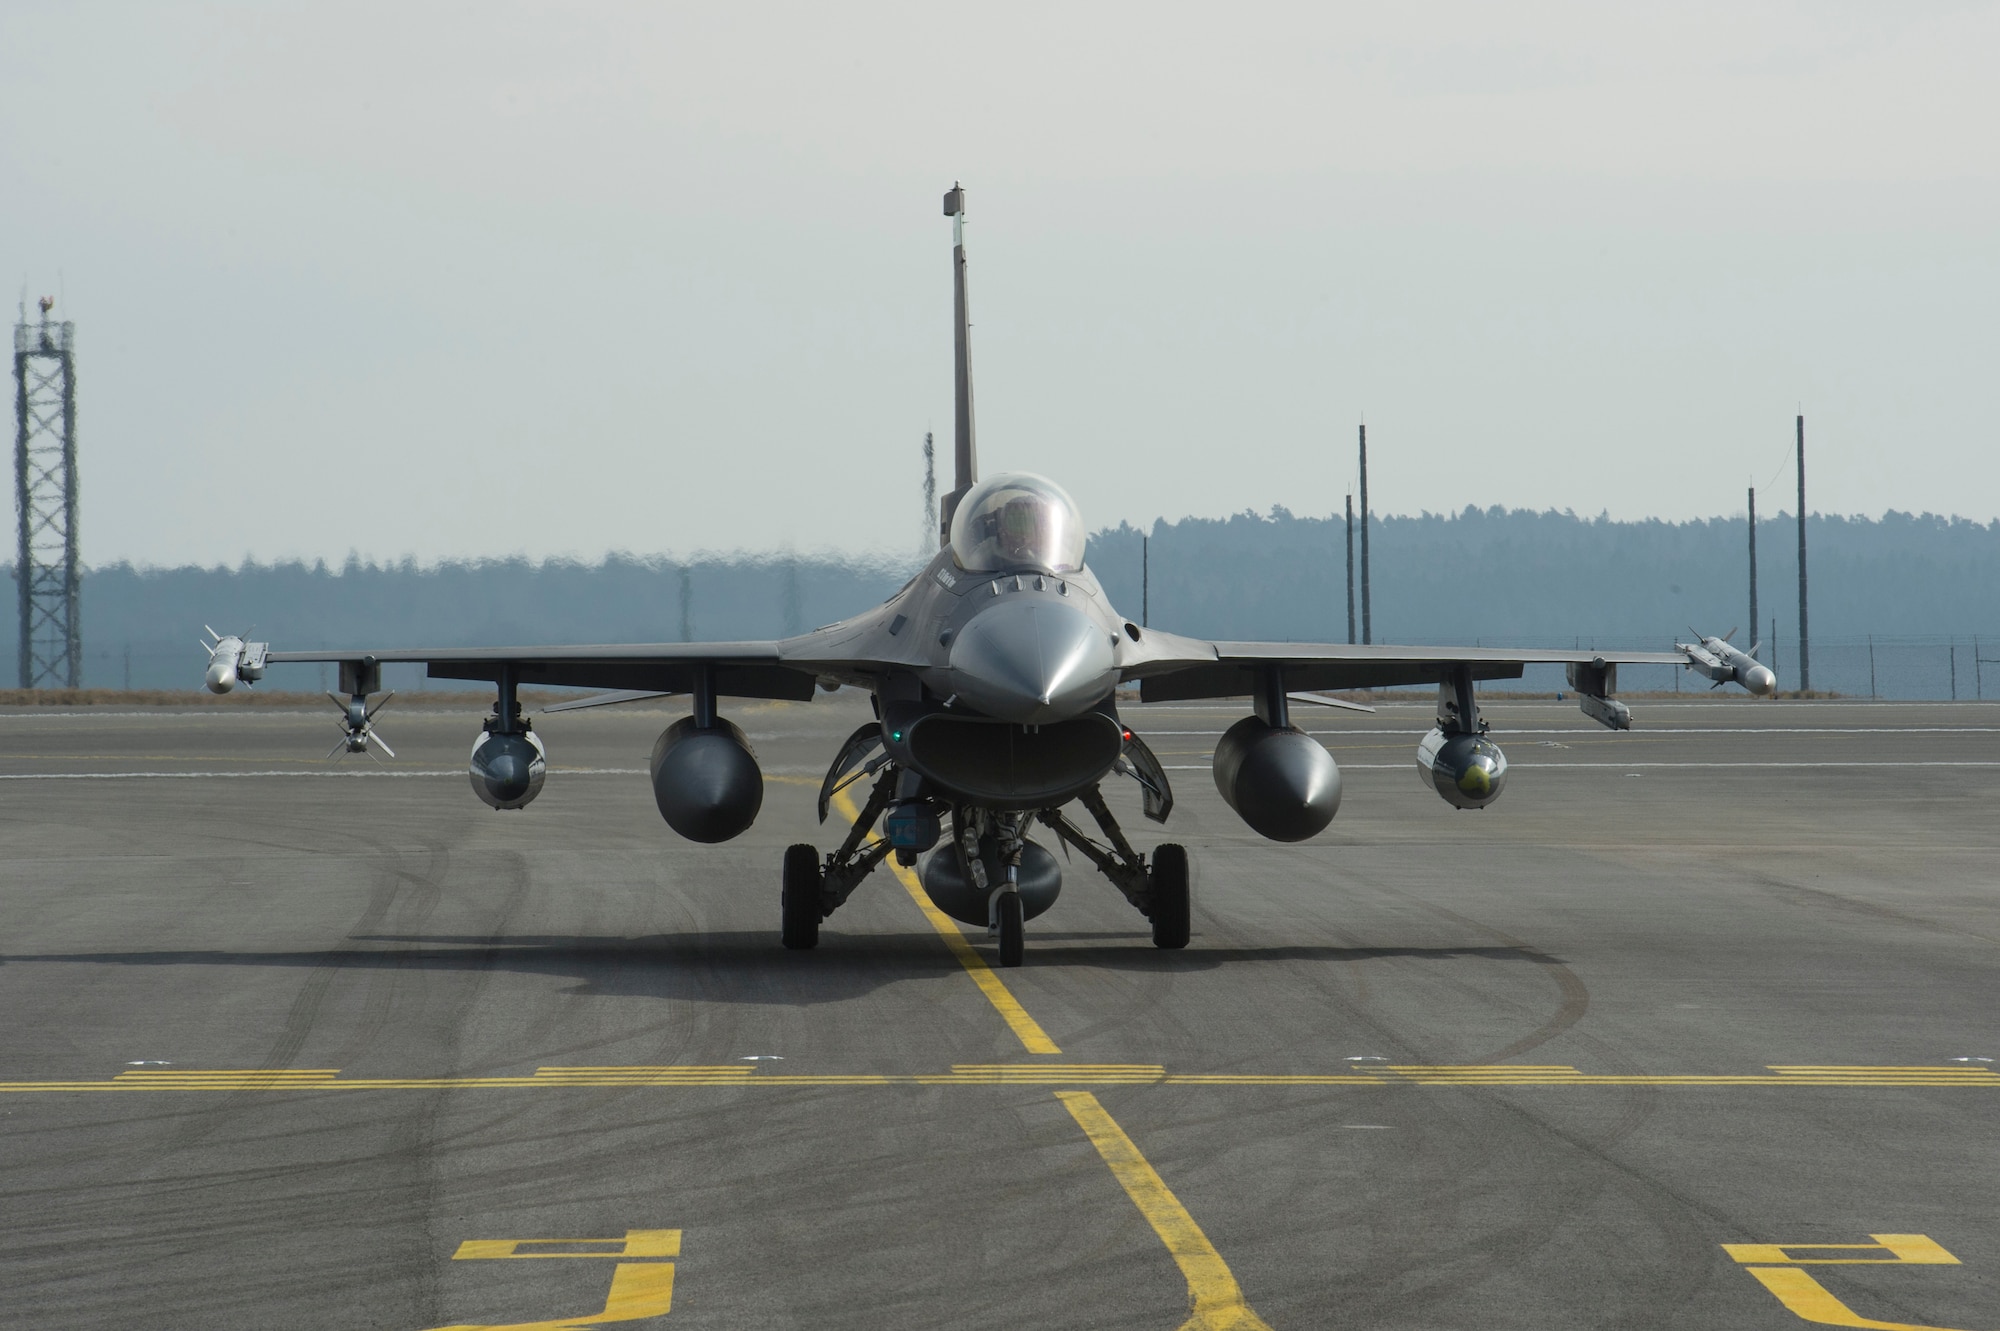 A U.S. F-16 Fighting Falcon assigned to the 112th Expeditionary Fighter Squadron, from the 180th Fighter Wing, Ohio Air National Guard, lands at Spangdahlem Air Base, Germany, March. 6, 2018. The 112th EFS arrived at Spangdahlem to support a base-wide exercise to increase the capability and readiness of U.S. forces, allowing for a faster response in the event of any aggression by any adversary against NATO sovereign territory. (U.S. Air Force photo by Senior Airman Dawn M. Weber)